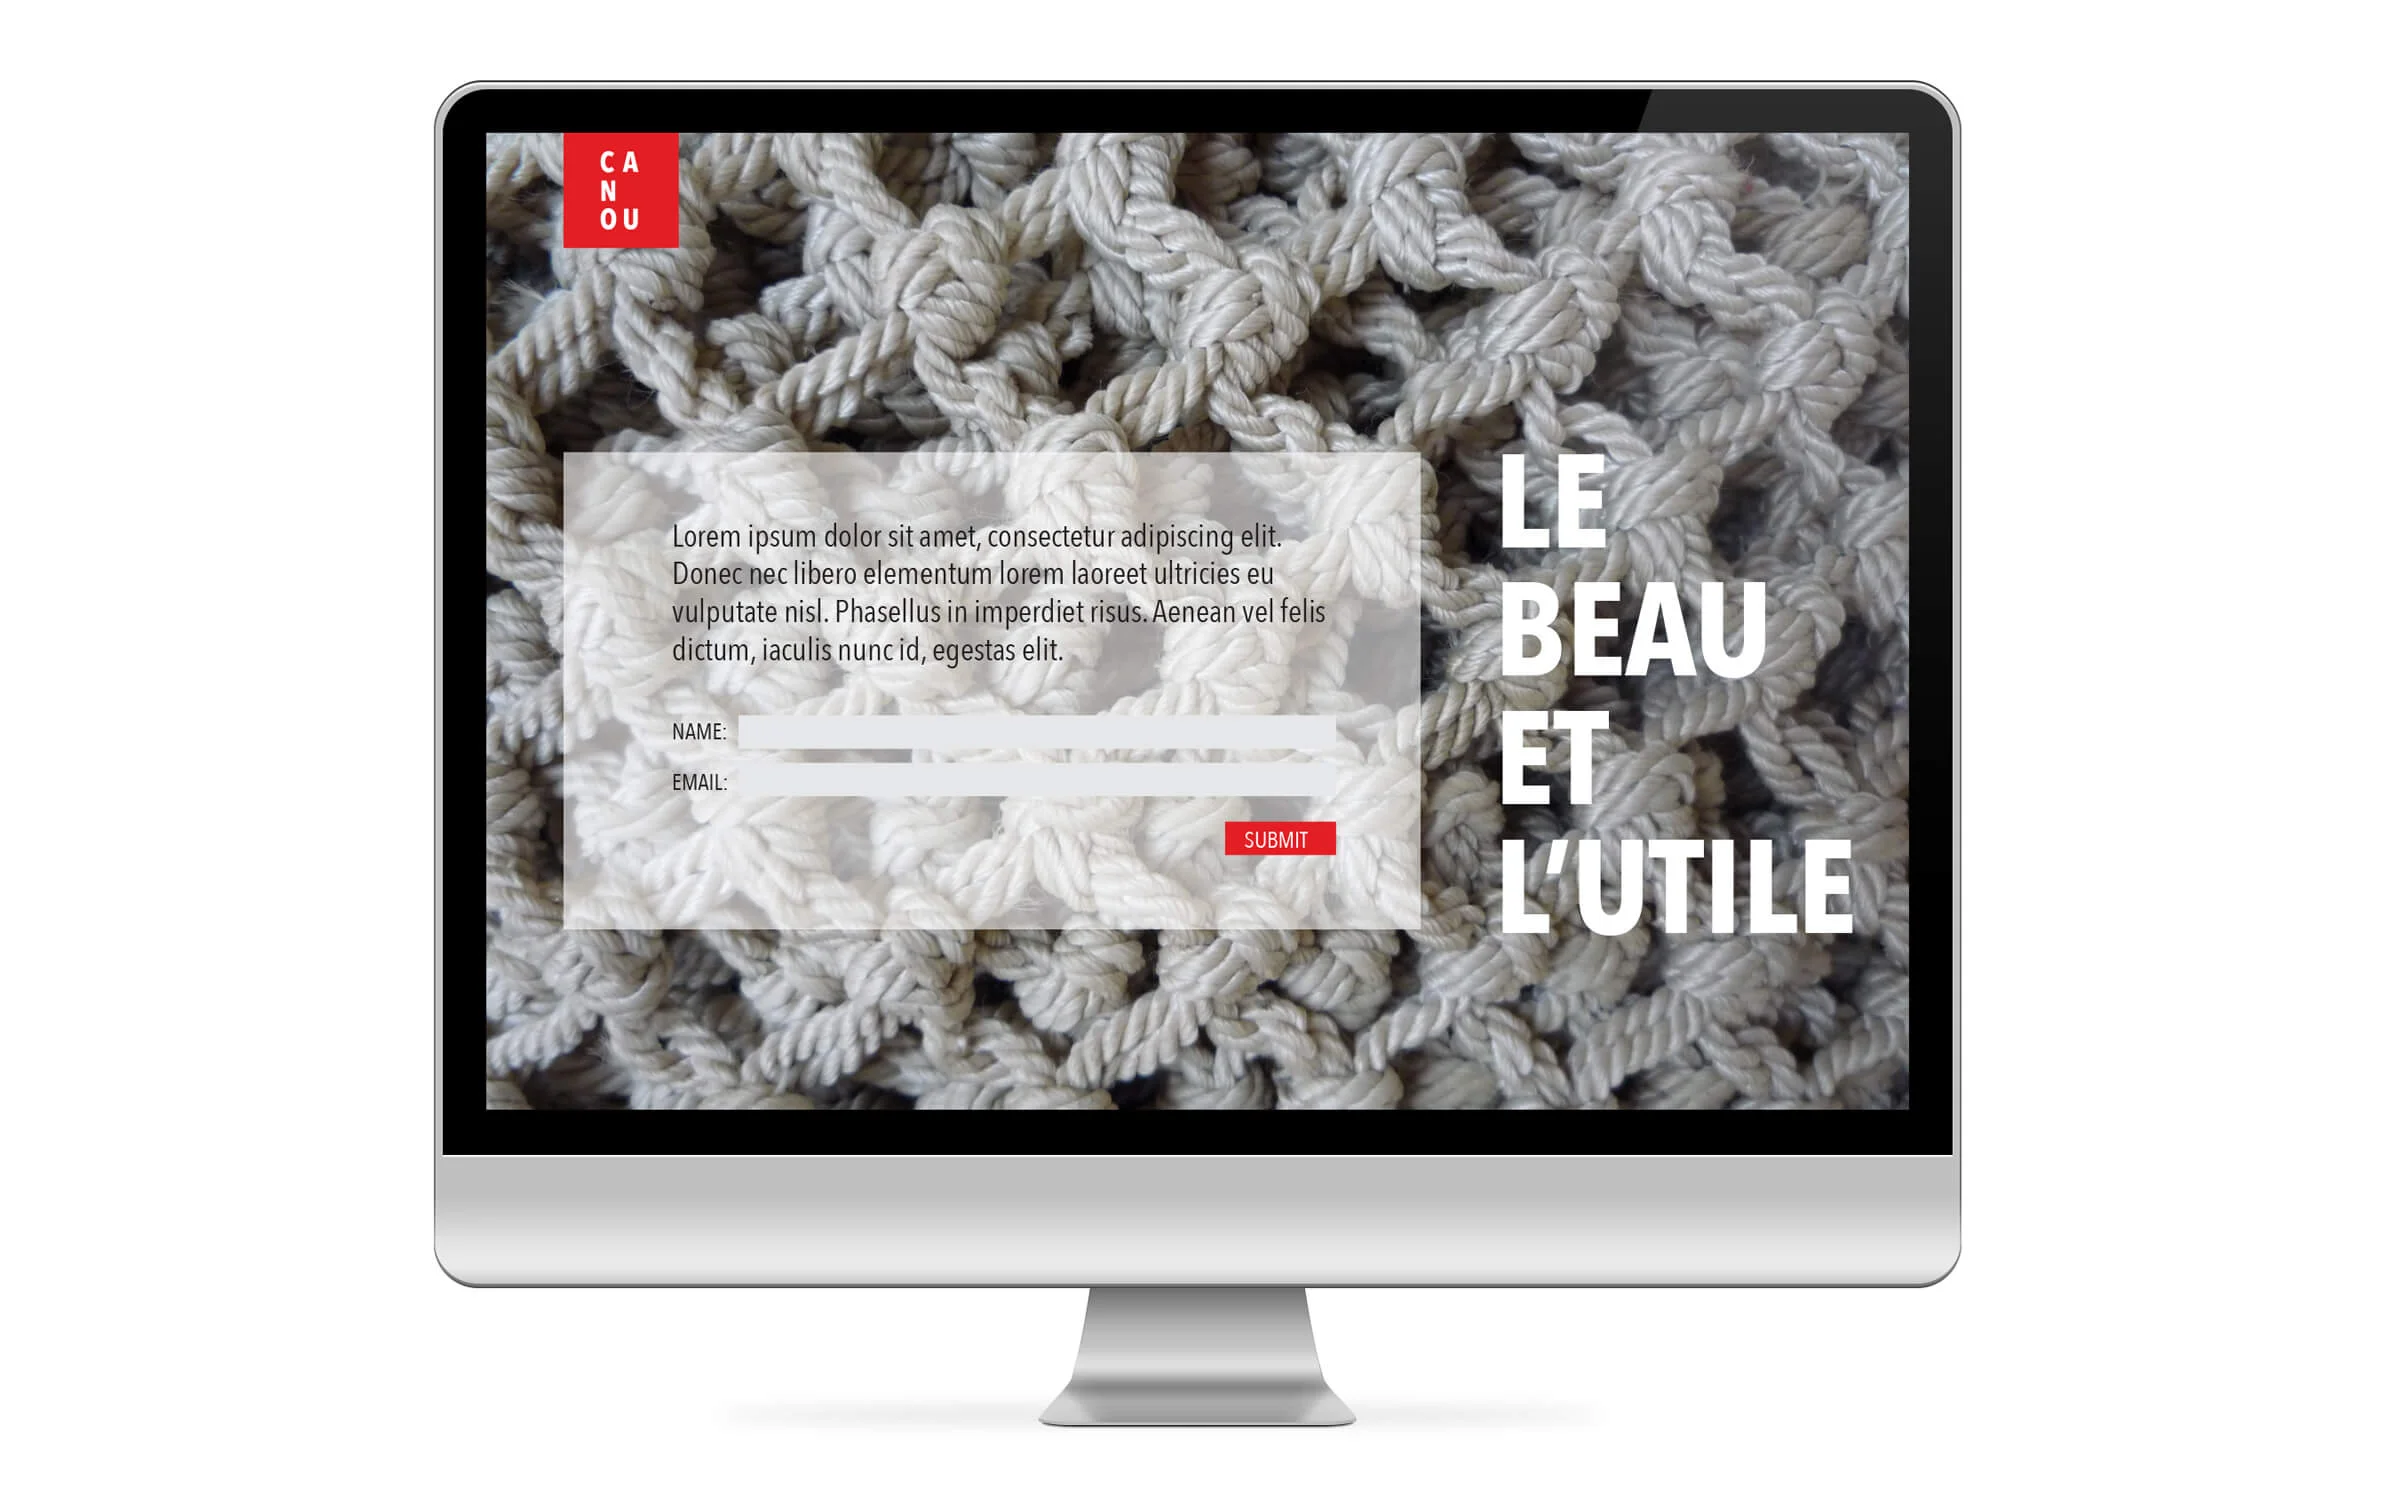 Website for Canou, a Québec product manufacturer, by Ottawa Graphic Design Studio idApostle